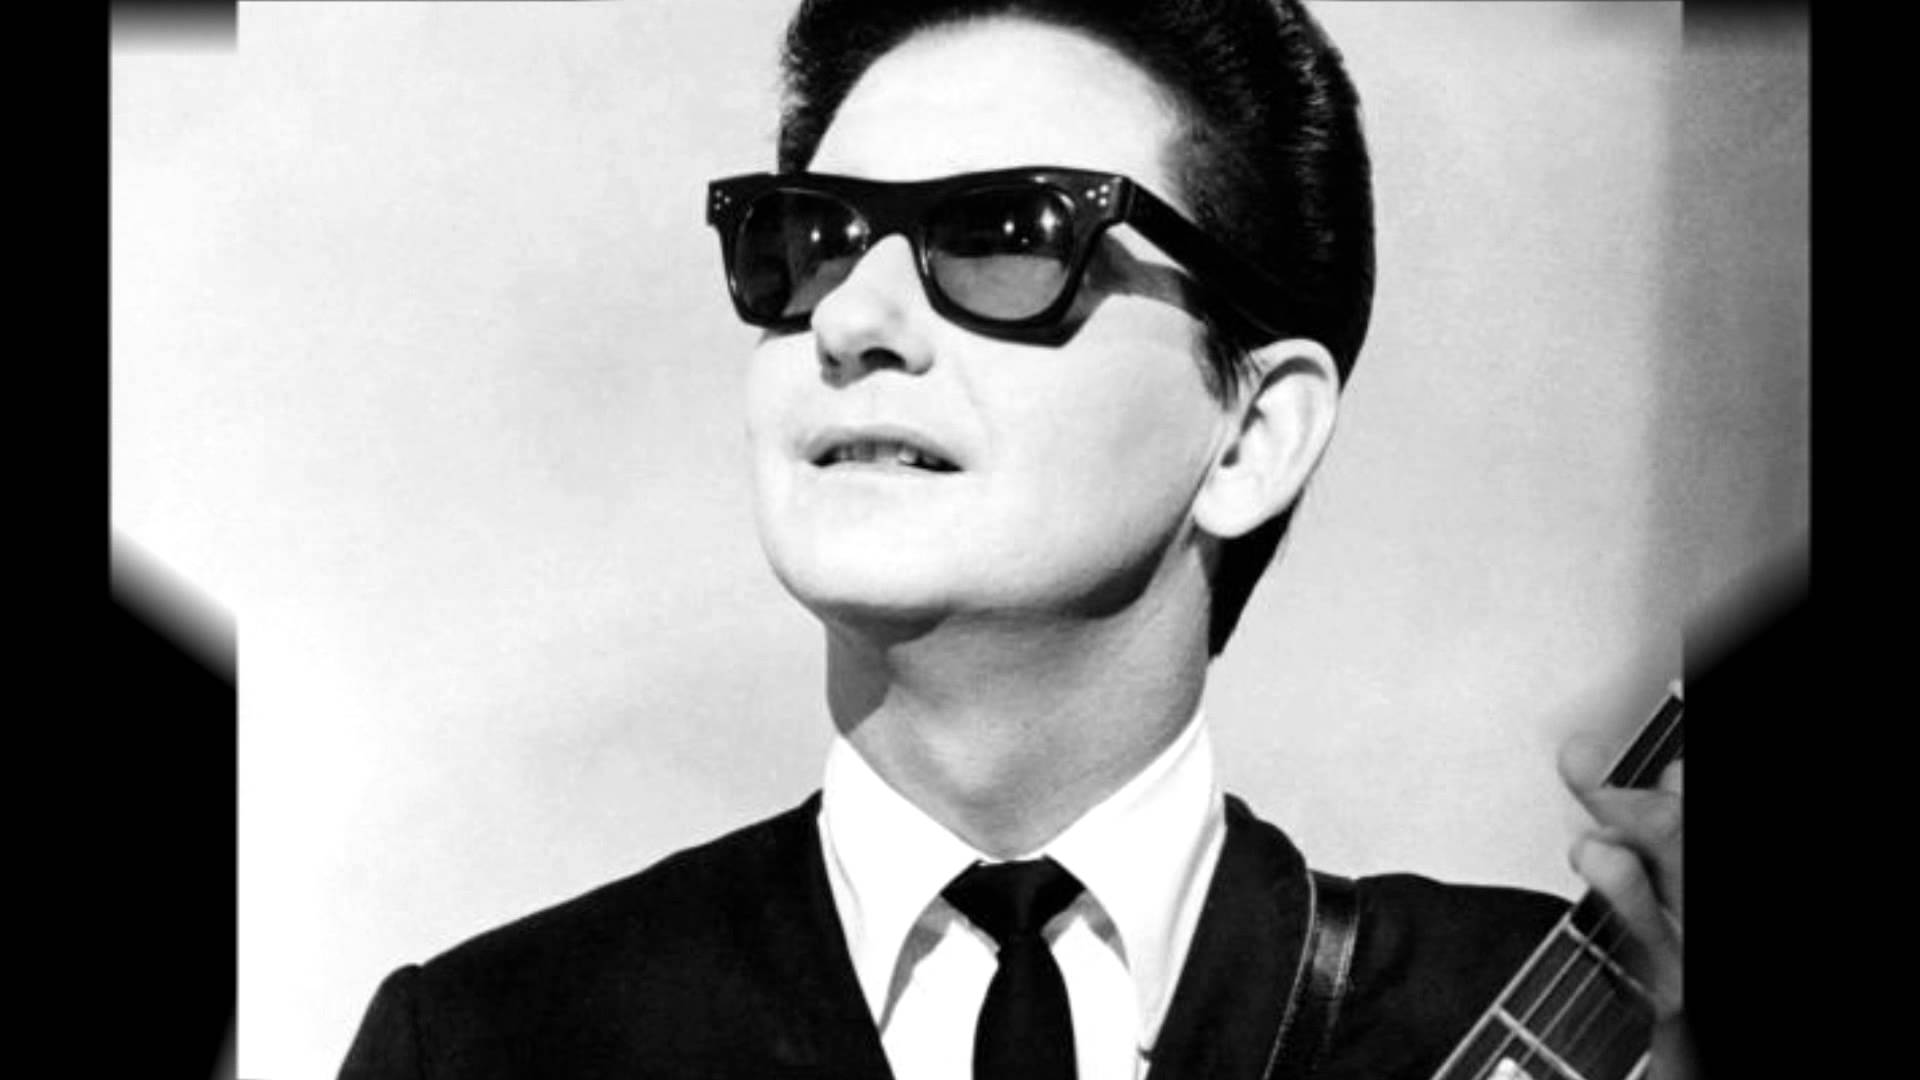 Puget Sound Radio. Roy Orbison has today's almost forgotten track